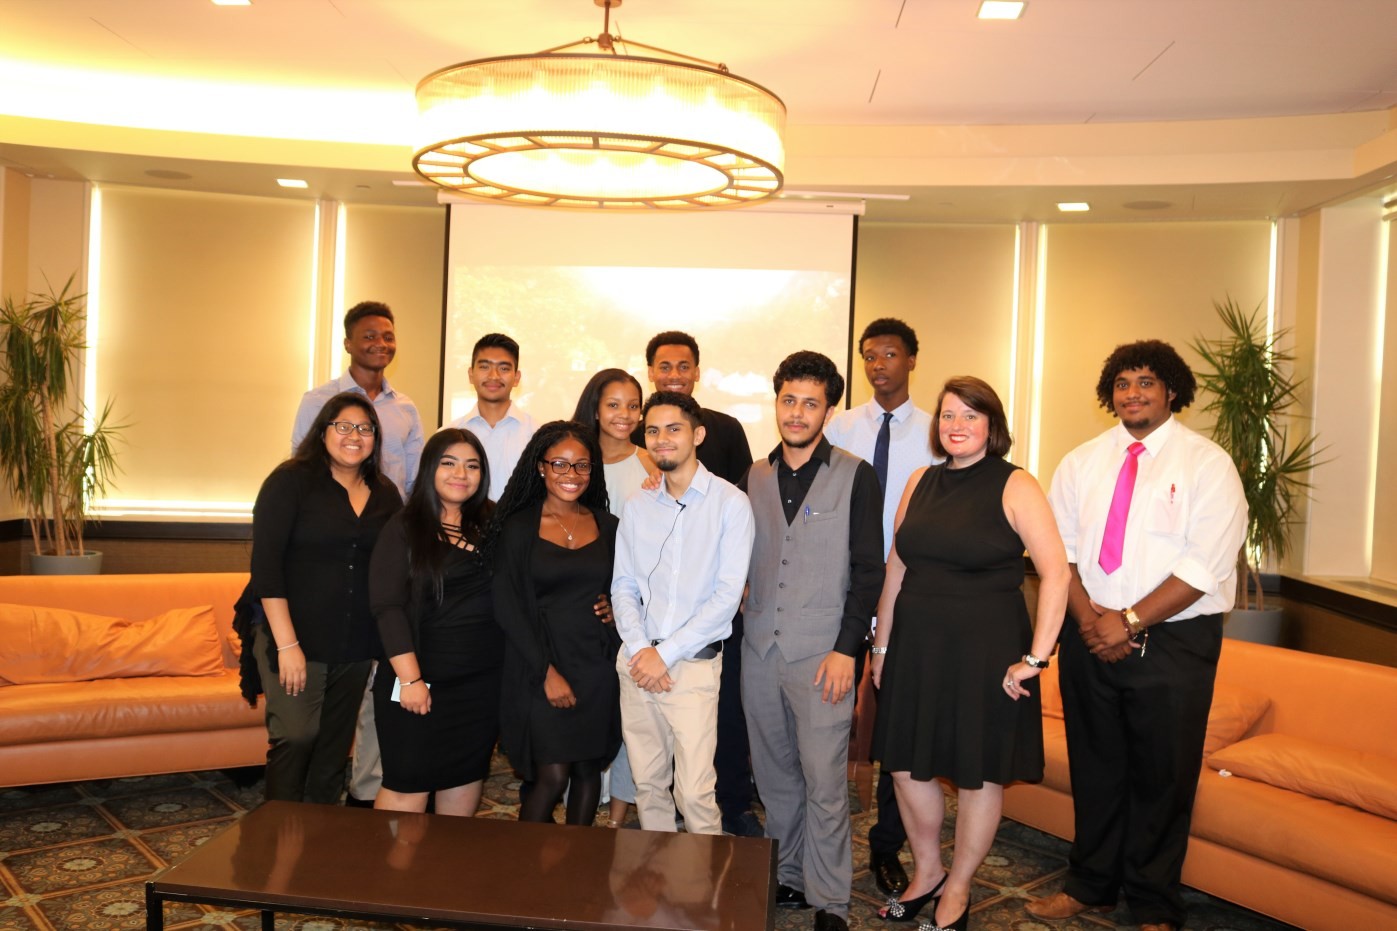 Participants in the Columbia University Local Community High School Summer Internship Program. The program provides students with practical work experience across Columbia University Facilities and Operations.